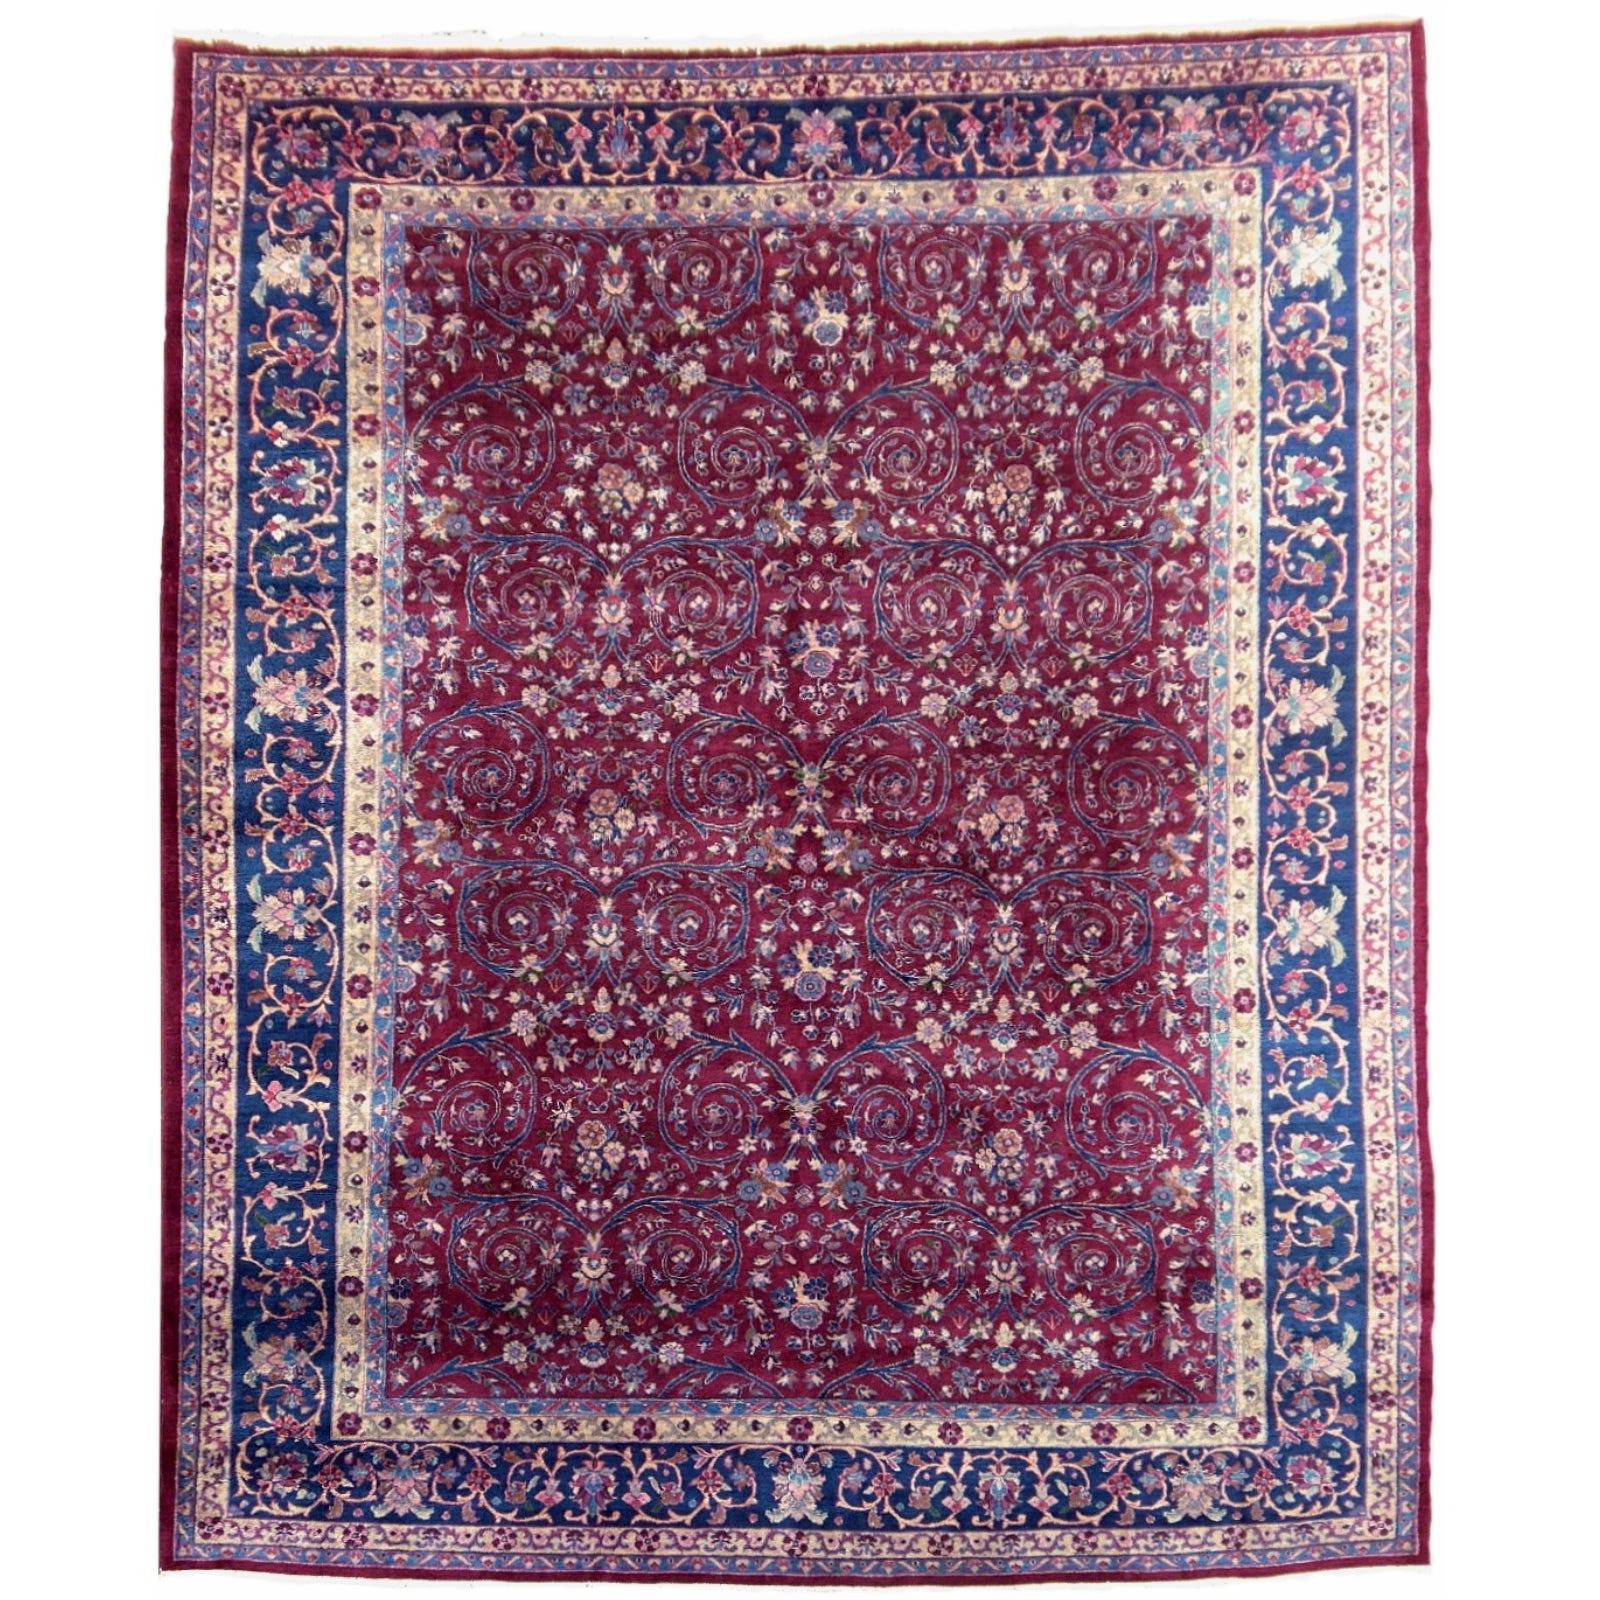 Agra Antique Rug in Purple Berry and Blue, 12 x 9 ft Djoharian Collection